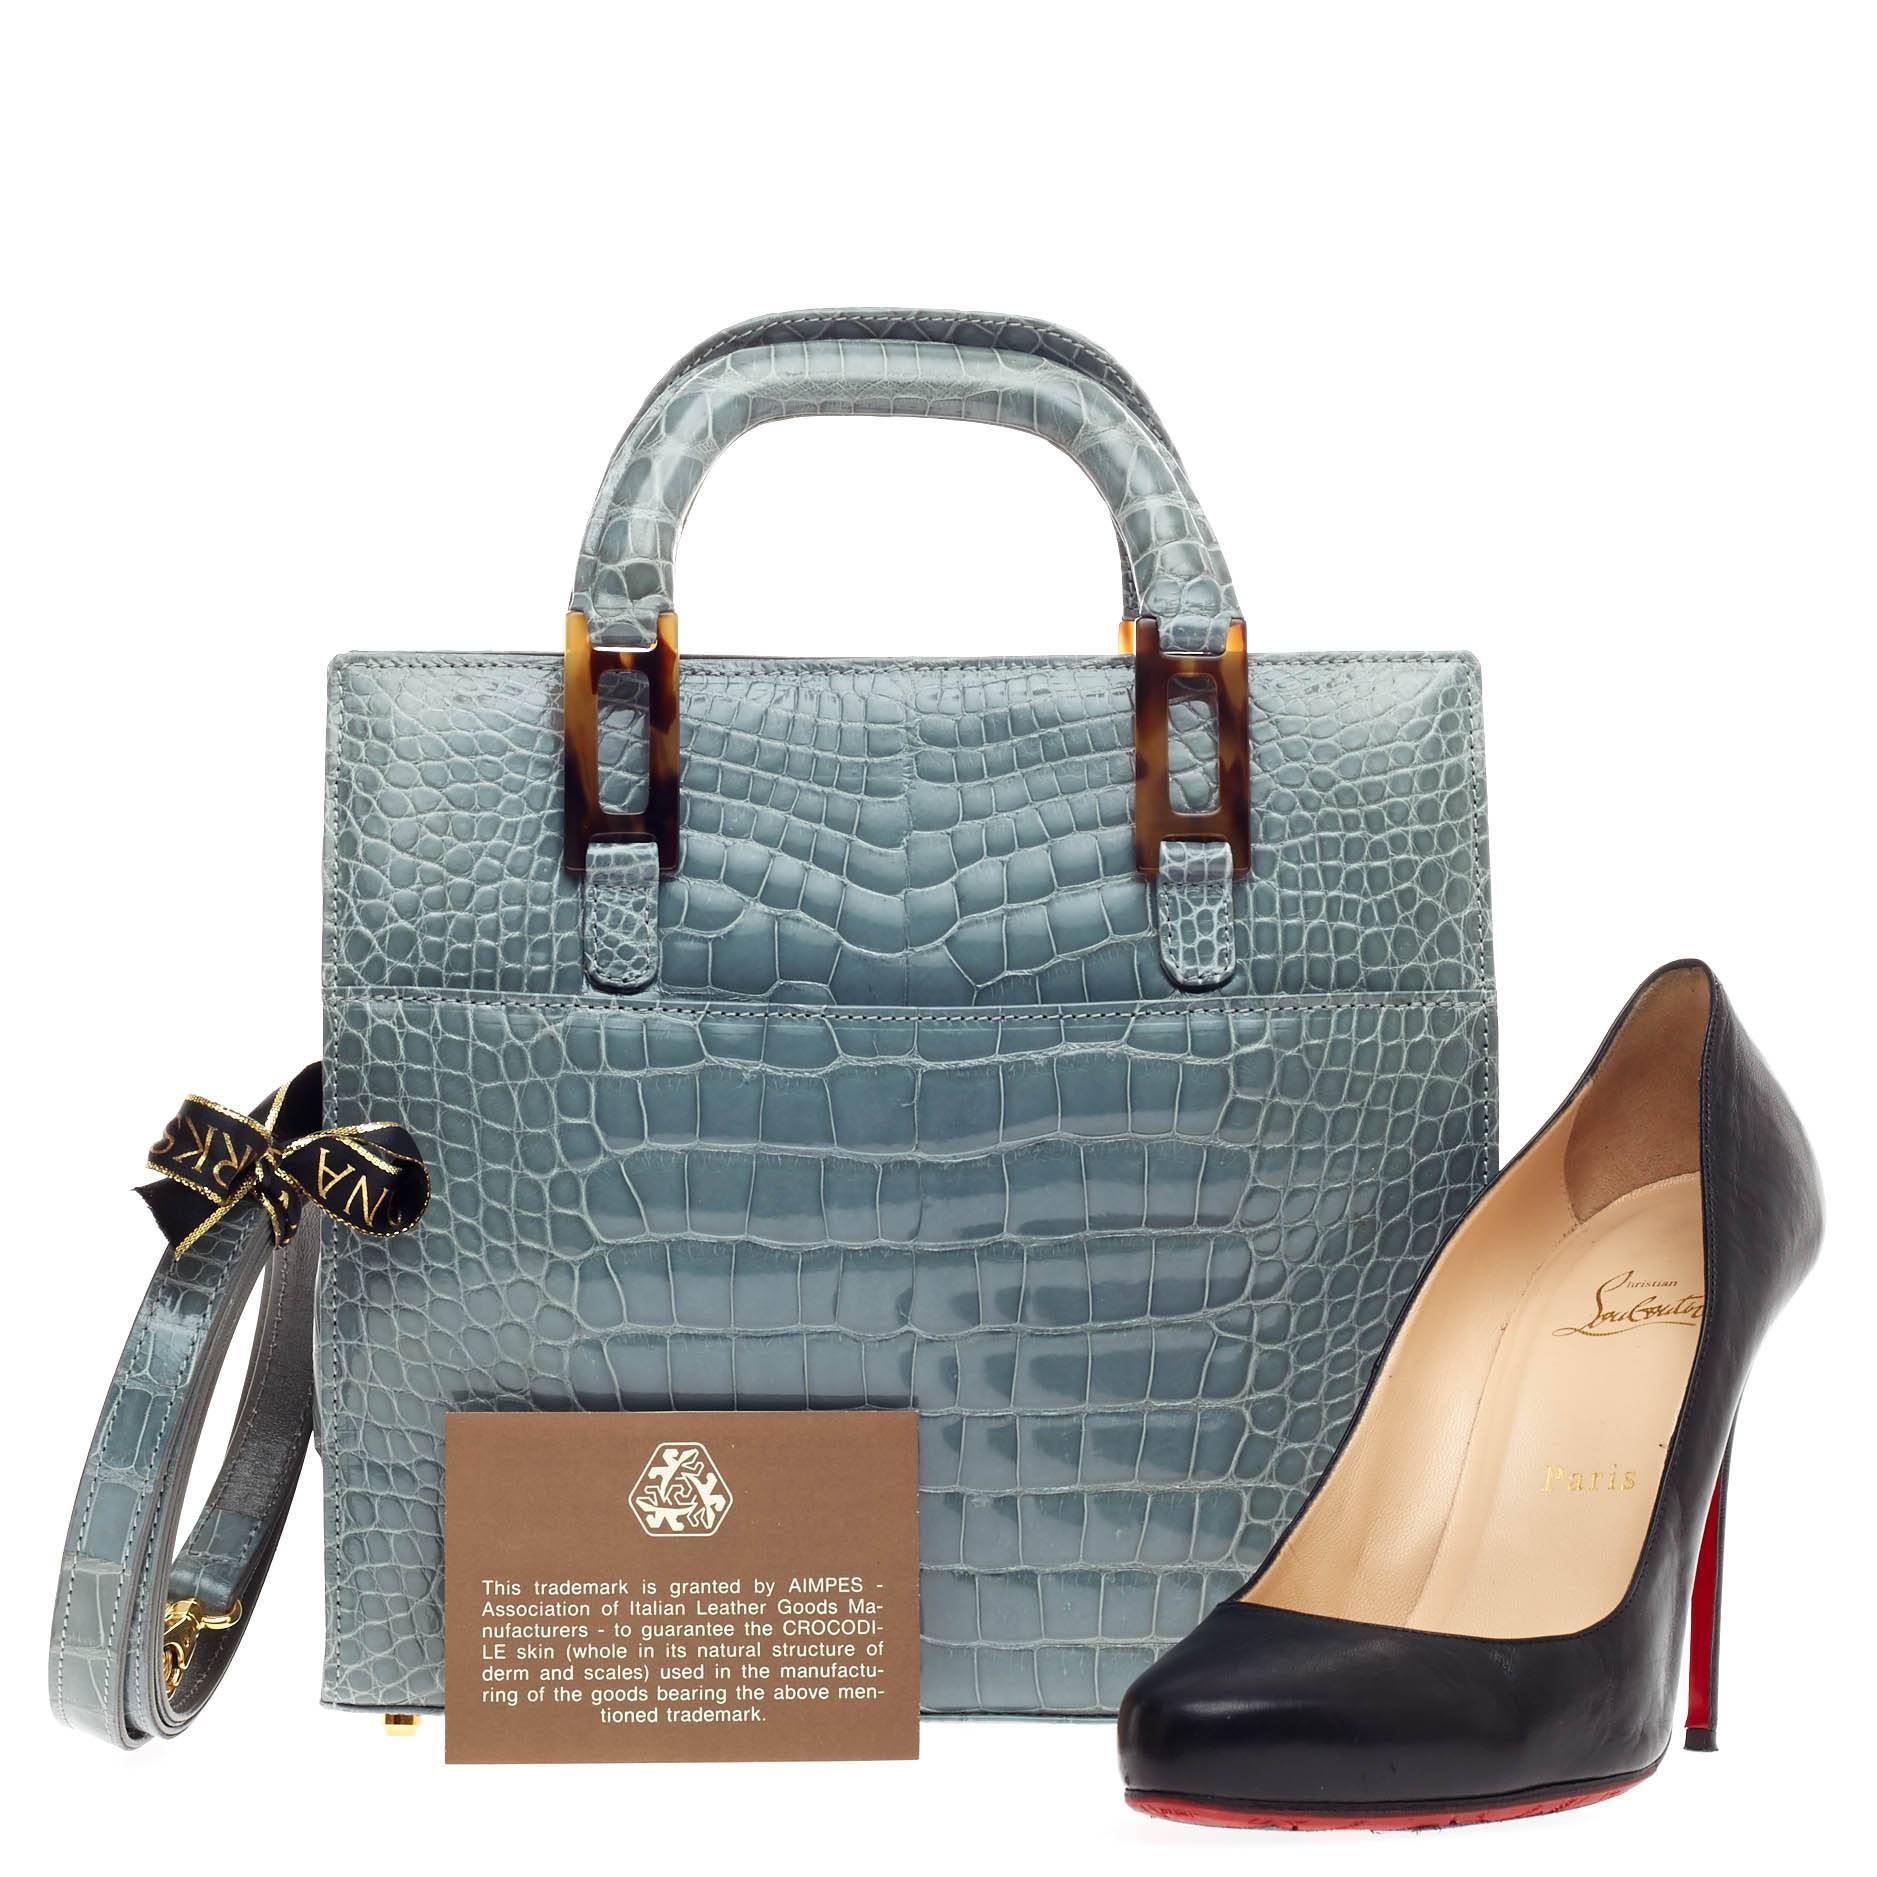 This authentic Lana Marks Convertible Zip Tote Crocodile Small is an exceptionally elegant masterpiece classic to Lana Marks. Hand-crafted in genuine powder blue-gray crocodile skin, this simple yet luxurious structured handle bag features